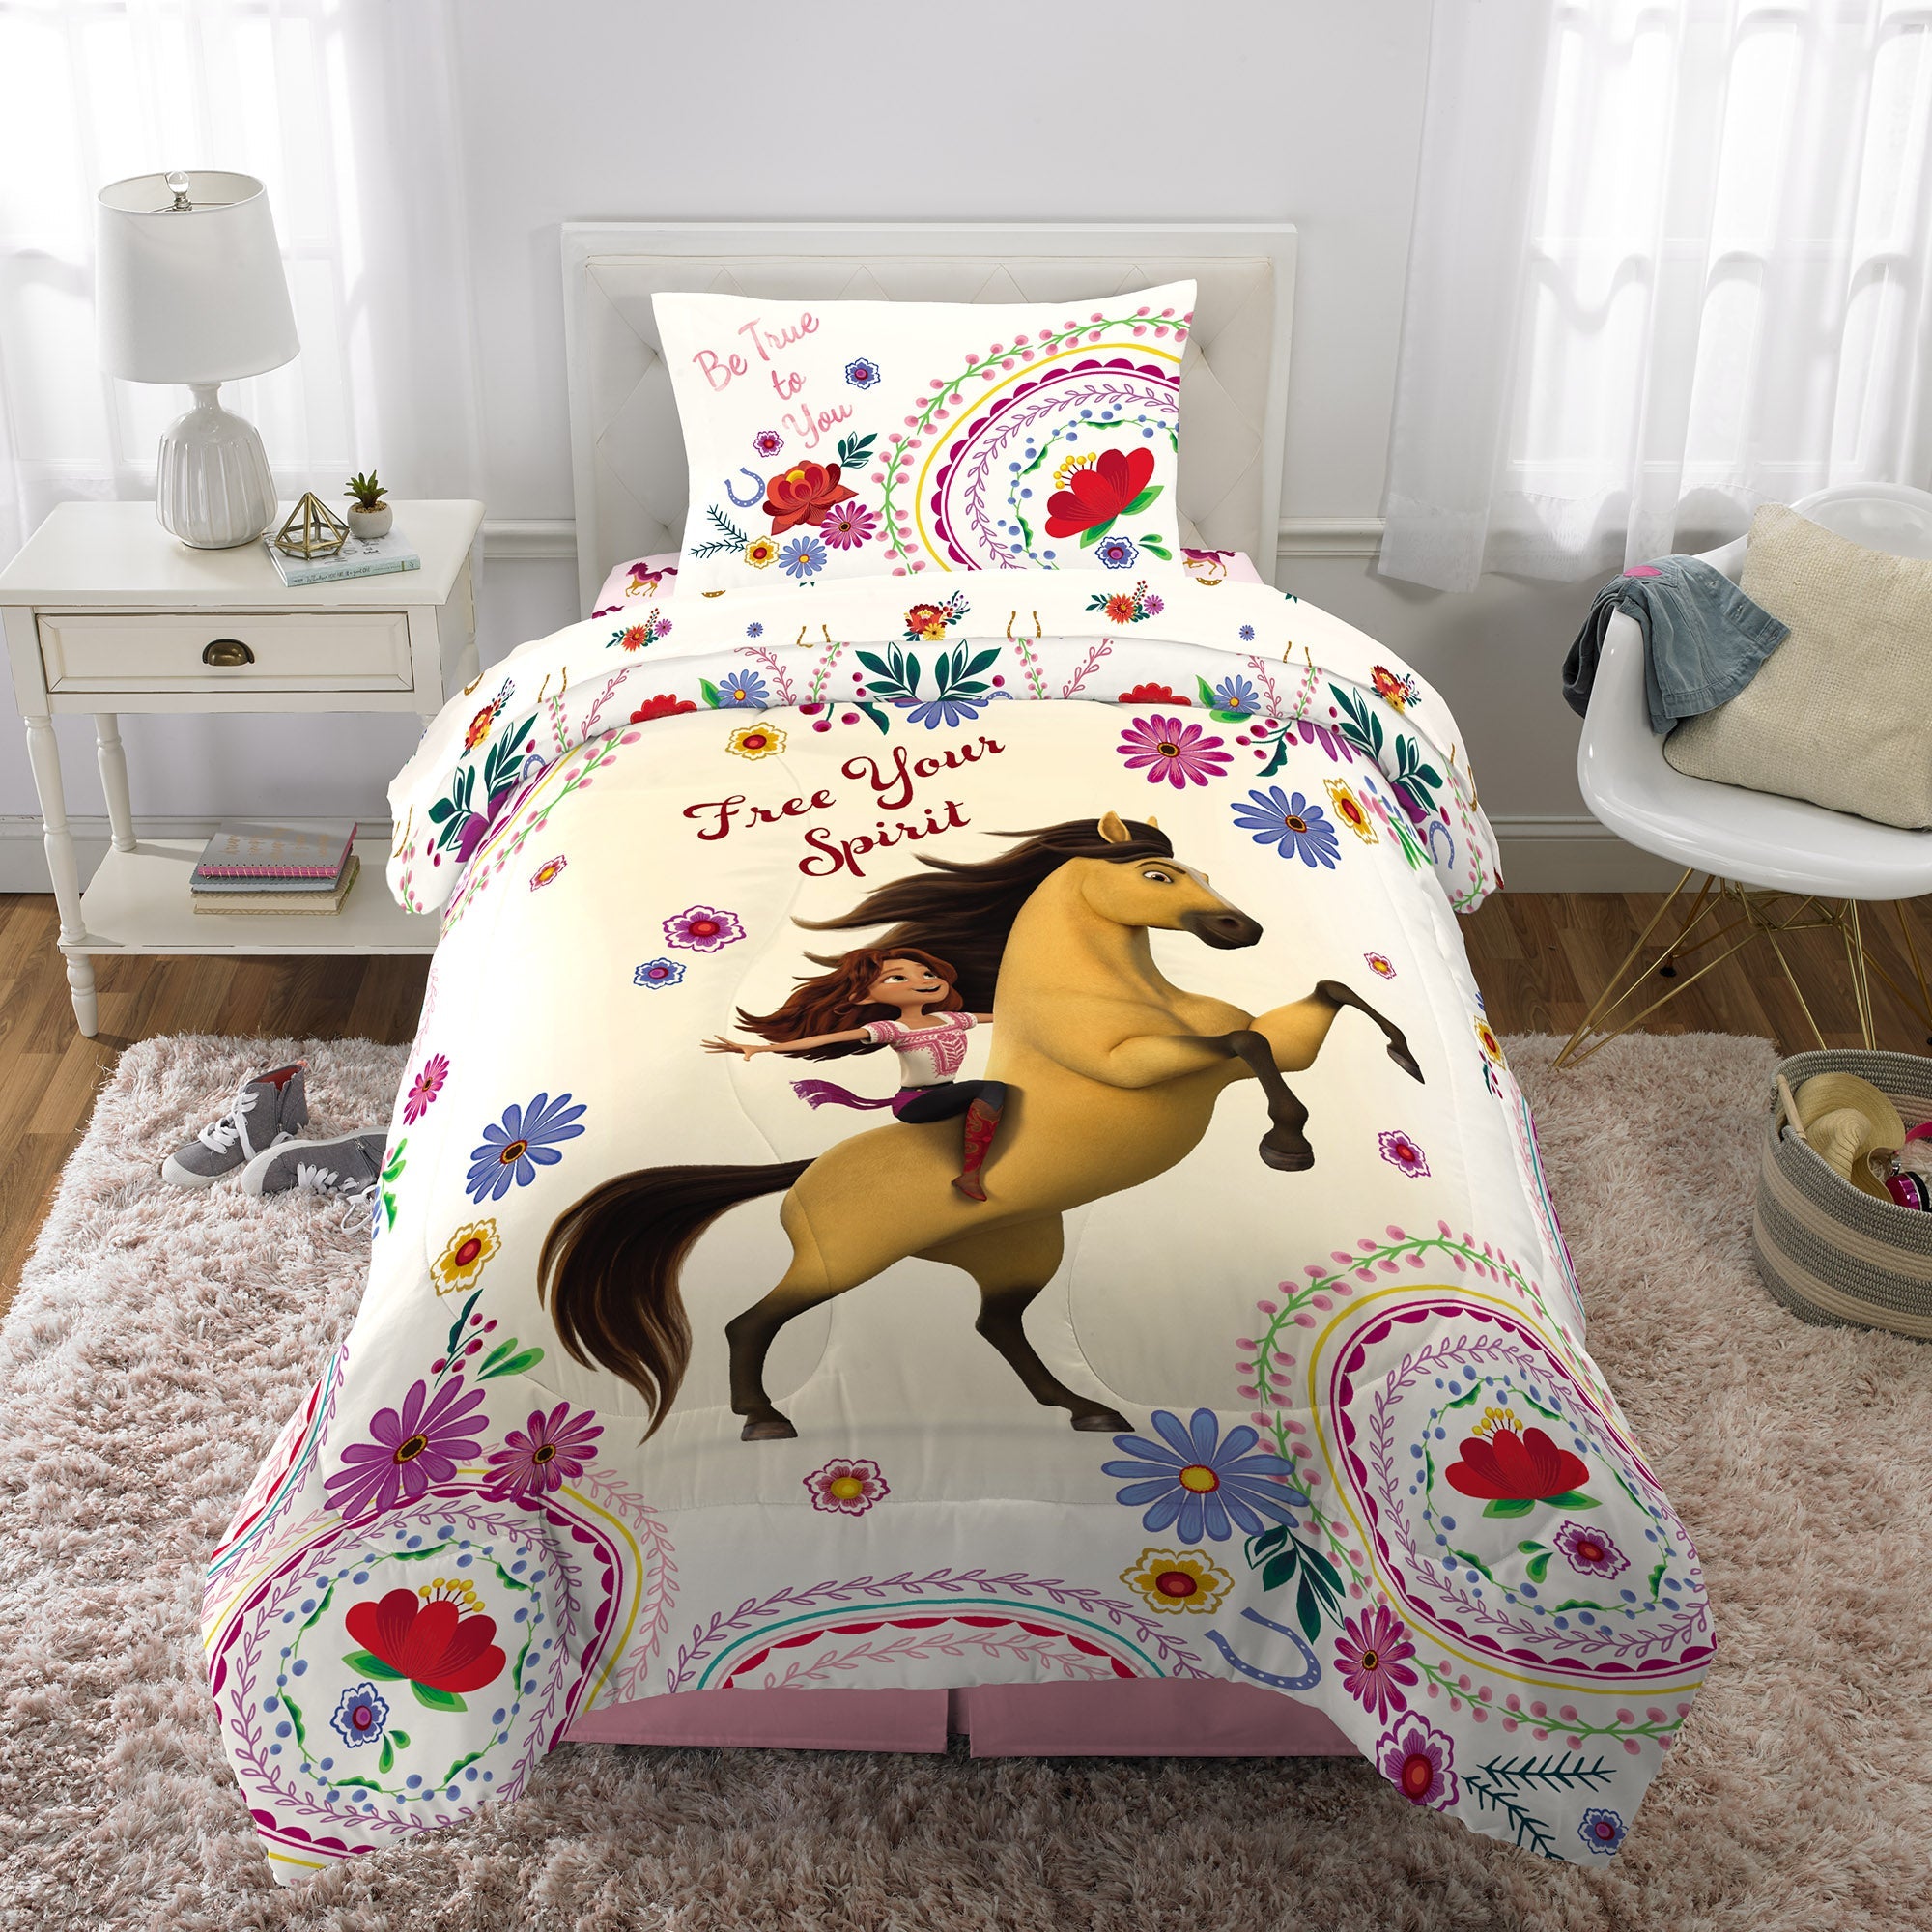 Spirit Riding Free Kids Twin Bed in a Bag, Comforter and Sheets, Yellow and Pink, DreamWorks